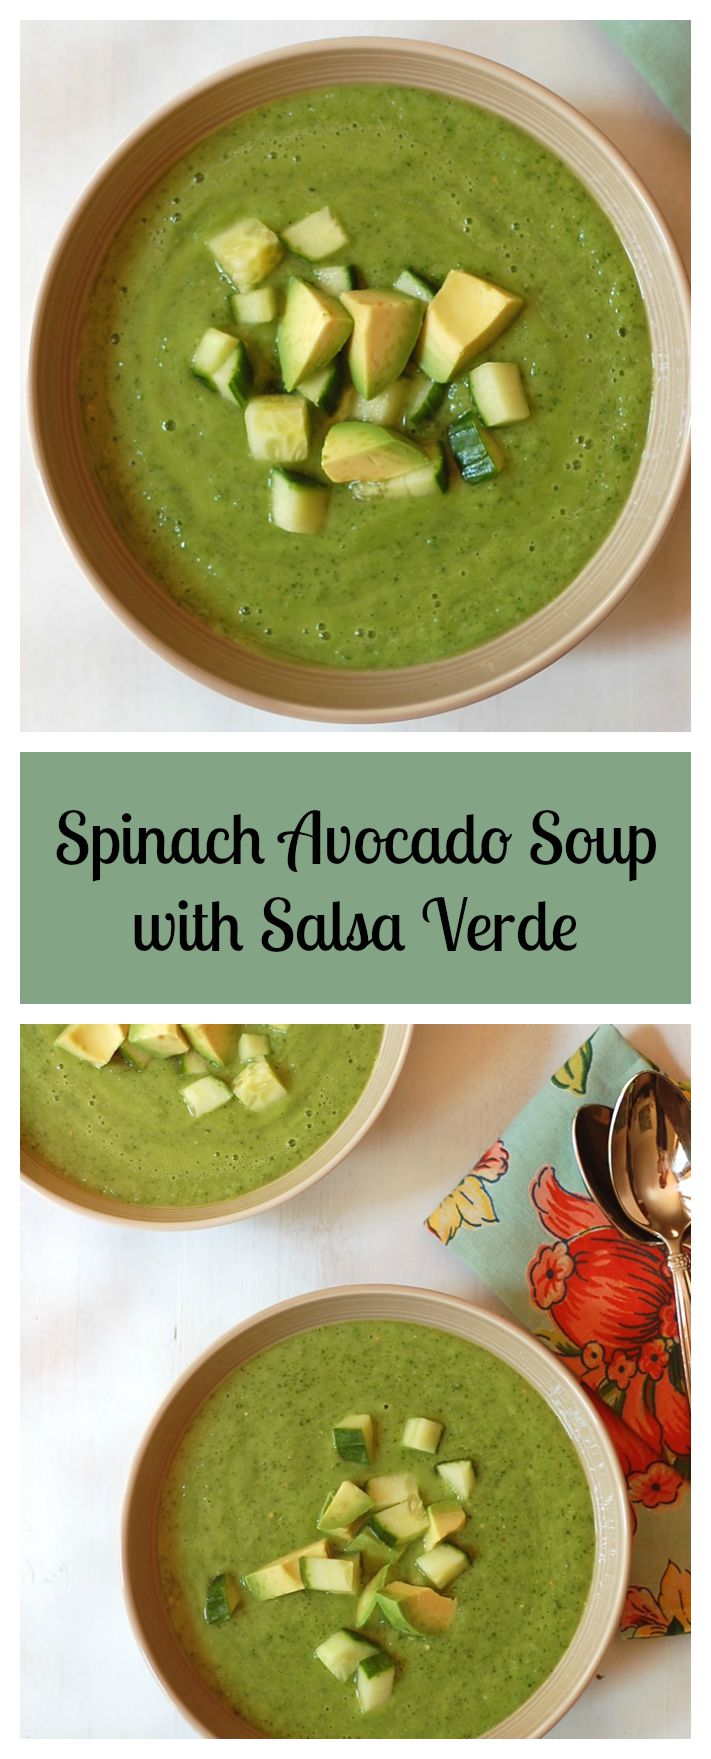 Spinach Avocado Soup with Salsa Verde. Vegan and Gluten-Free! Find the recipe at turniptheoven.com